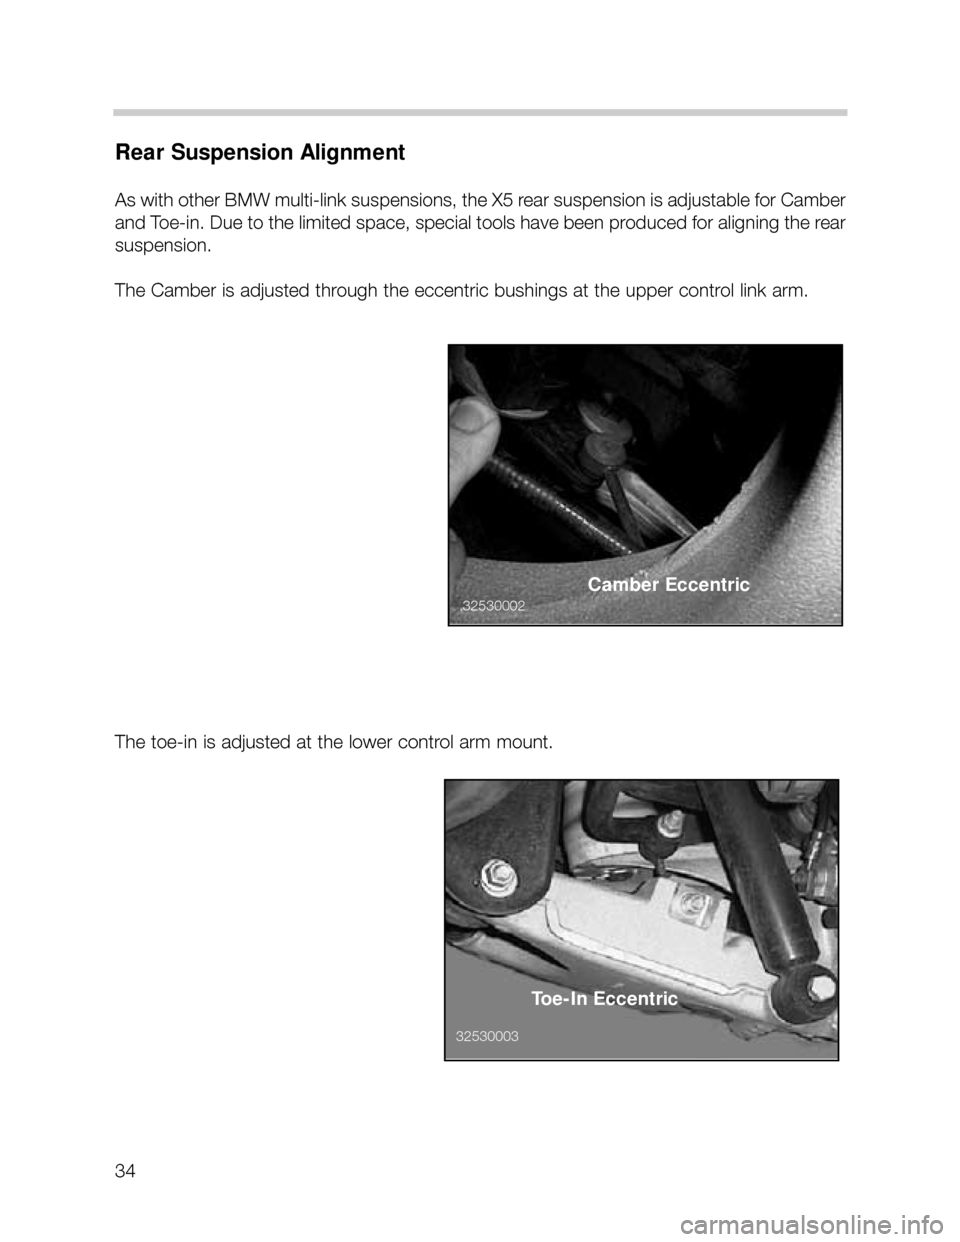 BMW X5 2001 E53 Owners Guide 34
Rear Suspension Alignment
As with other BMW multi-link suspensions, the X5 rear suspension is adjustable for Camber
and Toe-in. Due to the limited space, special tools have been produced for aligni